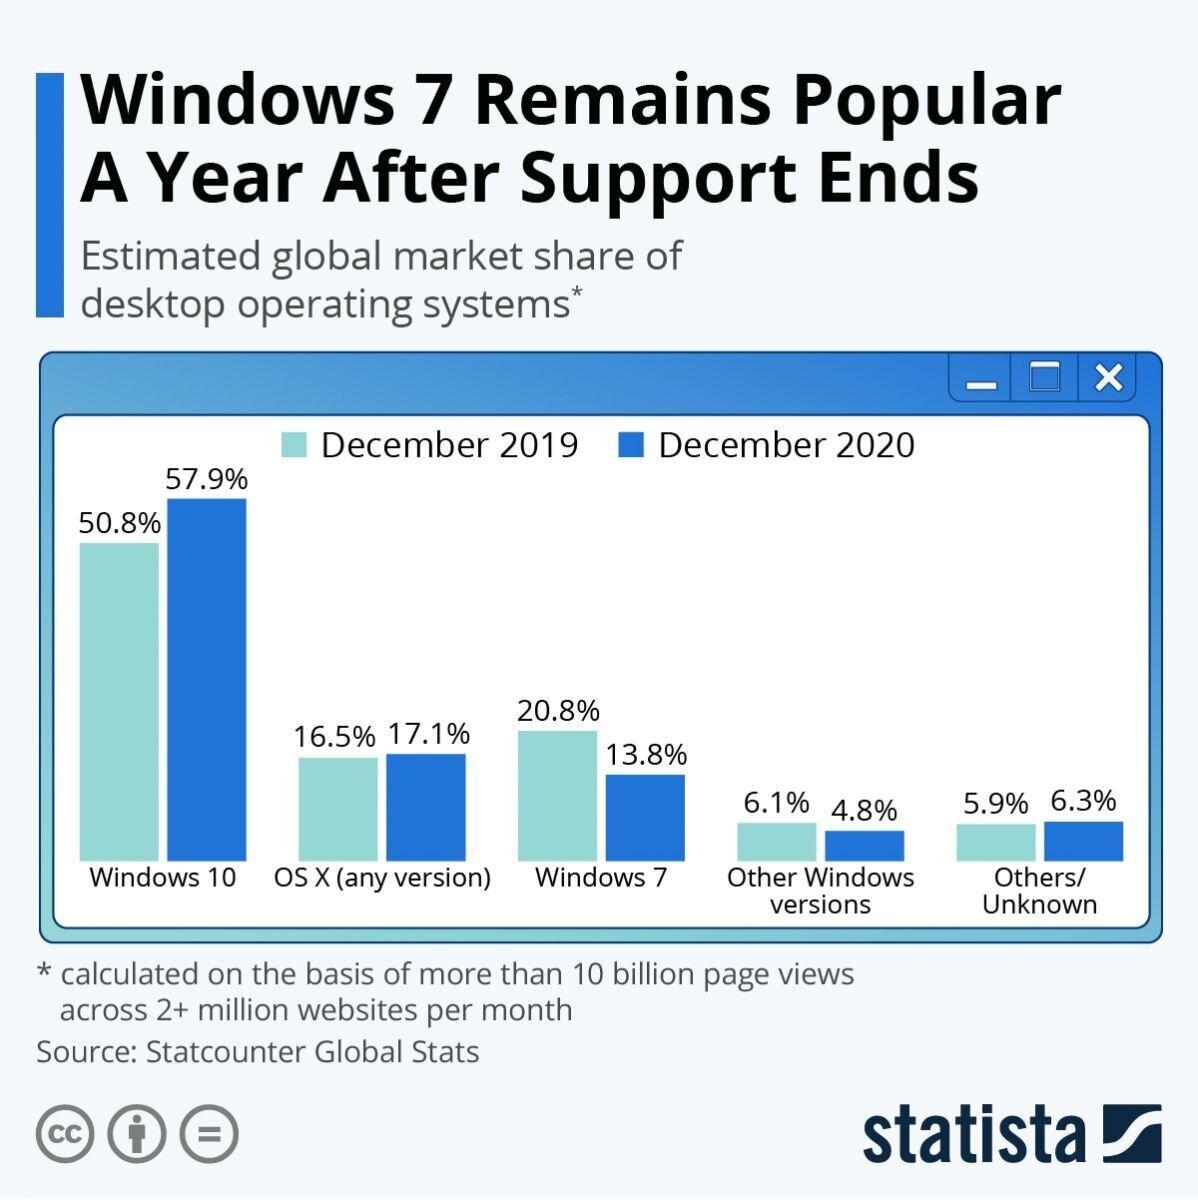 Windows 7 Remains Popular A Year After Support Ends